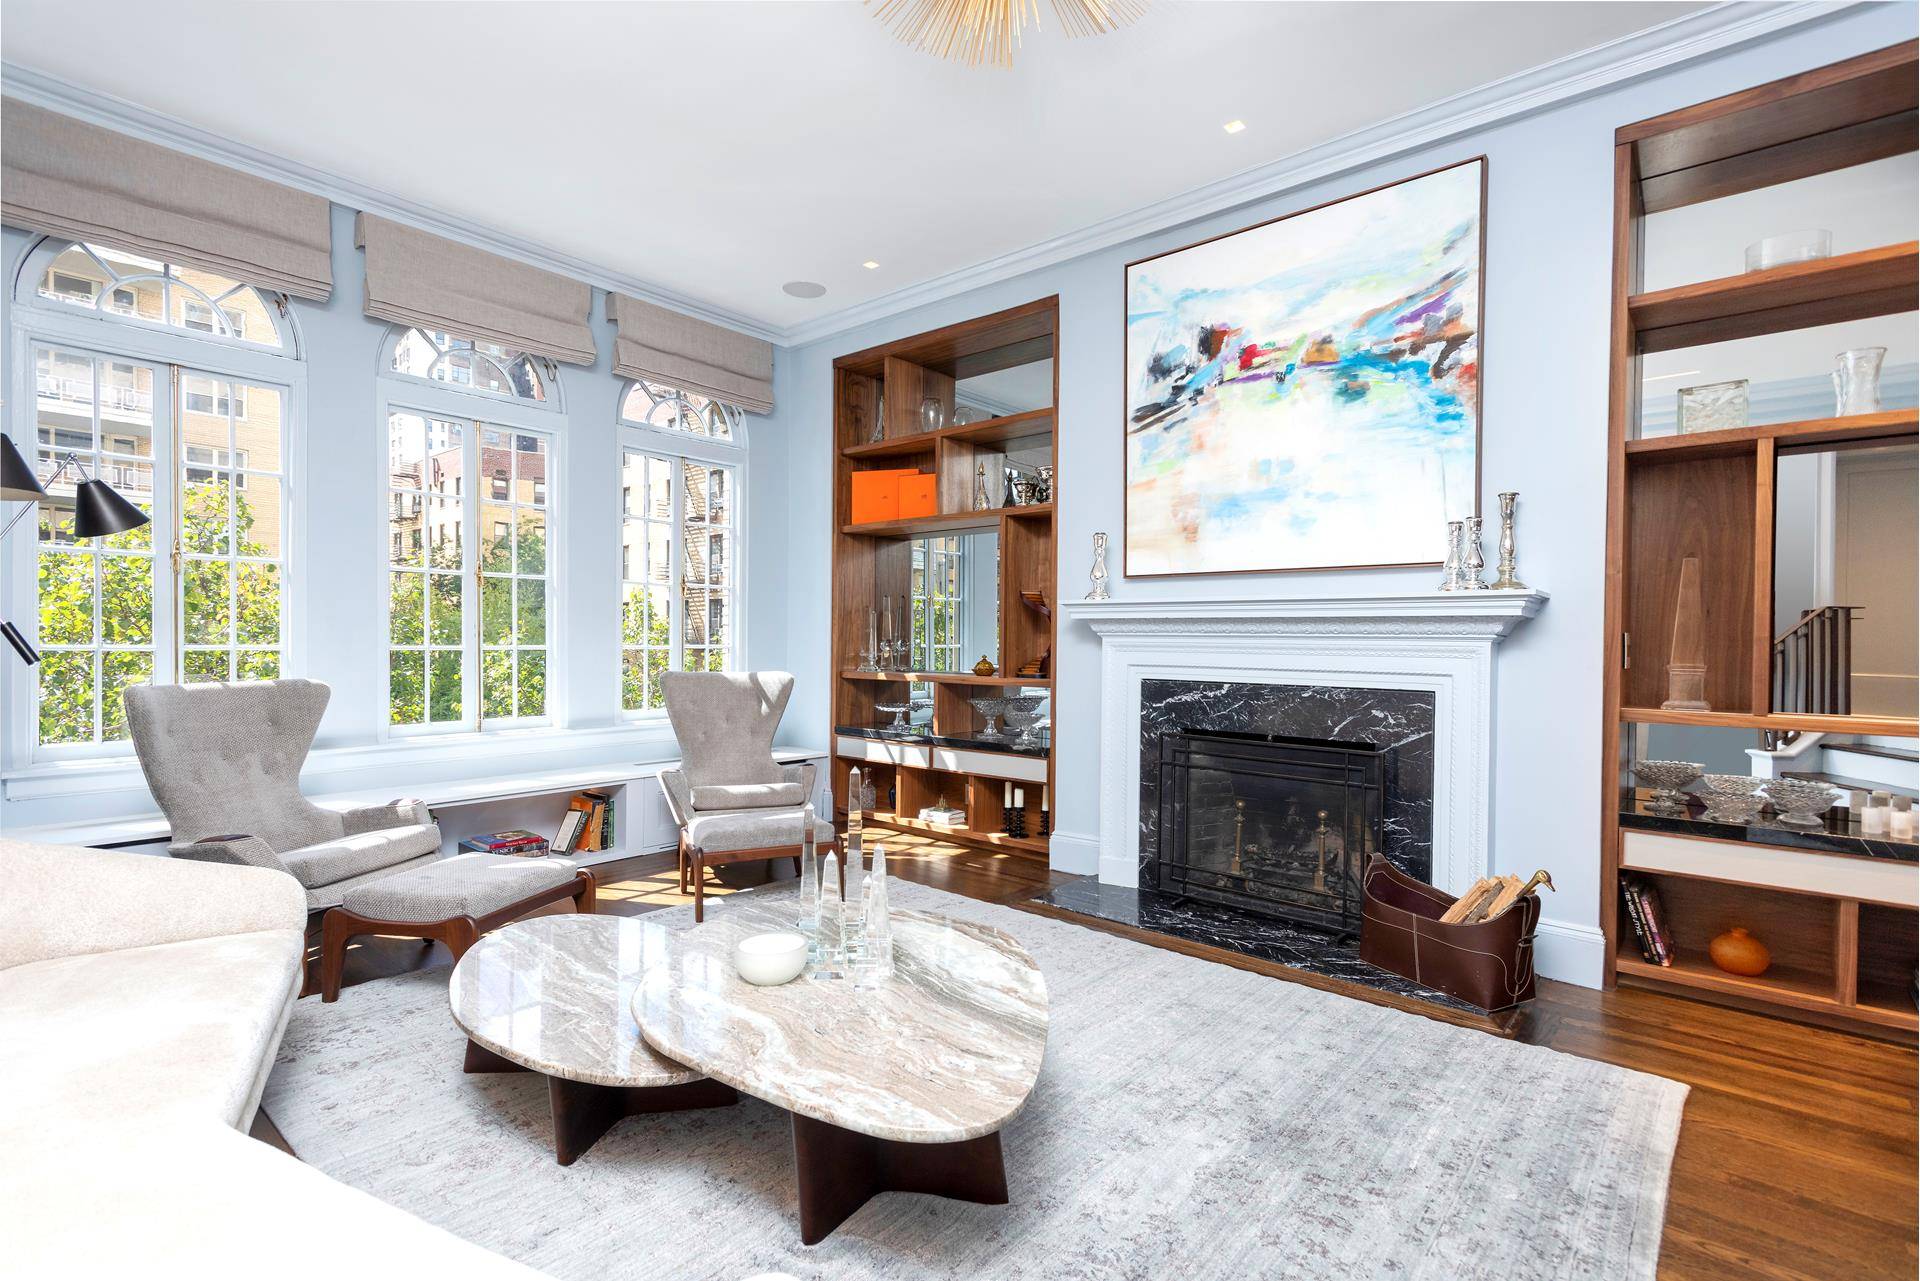 Sophisticated, architectural, classic Prewar apartment has been renovated to perfection in a seamless combination of old world architecture and today's amenities in impeccable style and design.